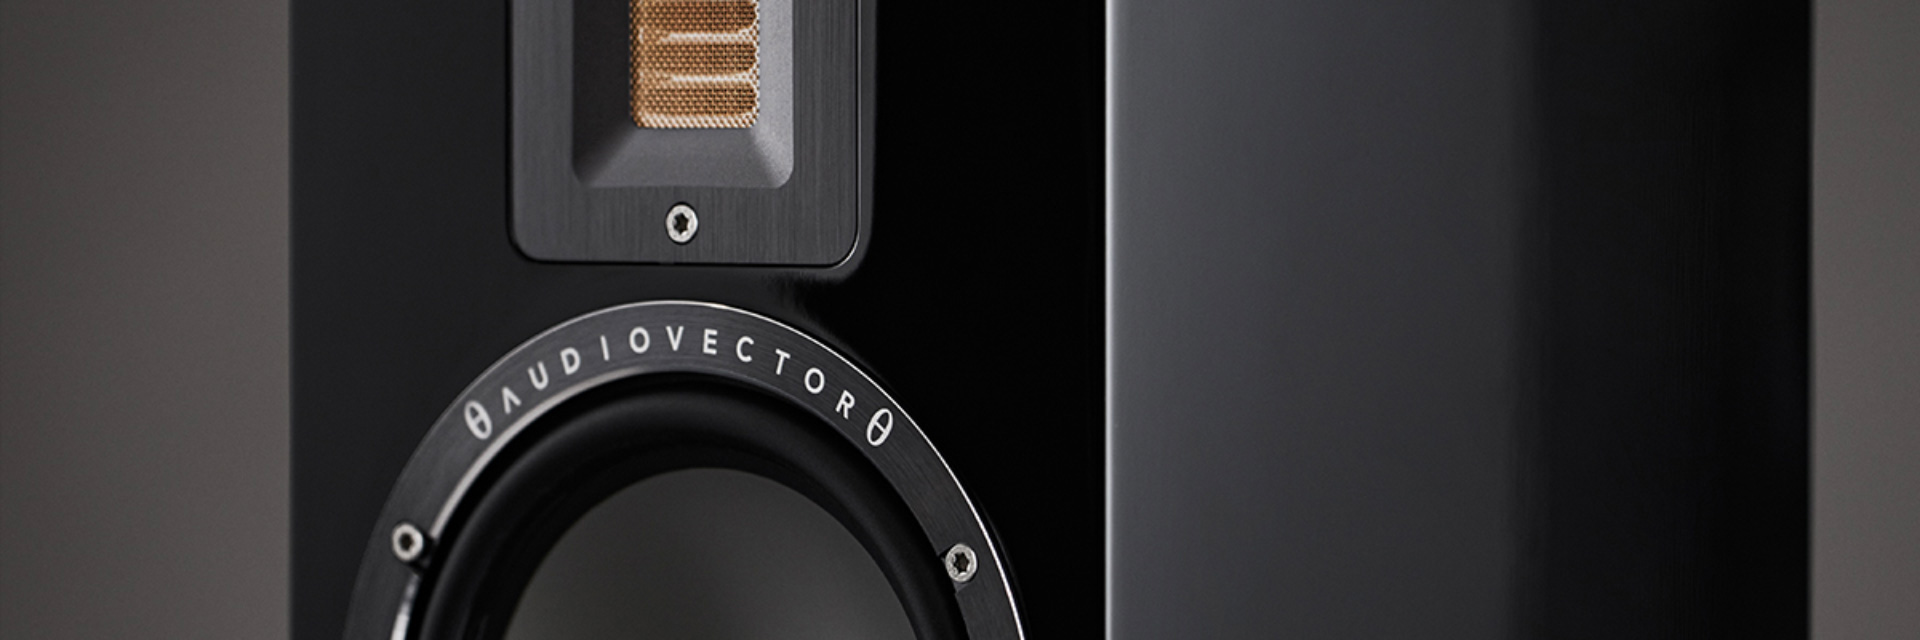 Audiovector QR Special Edition